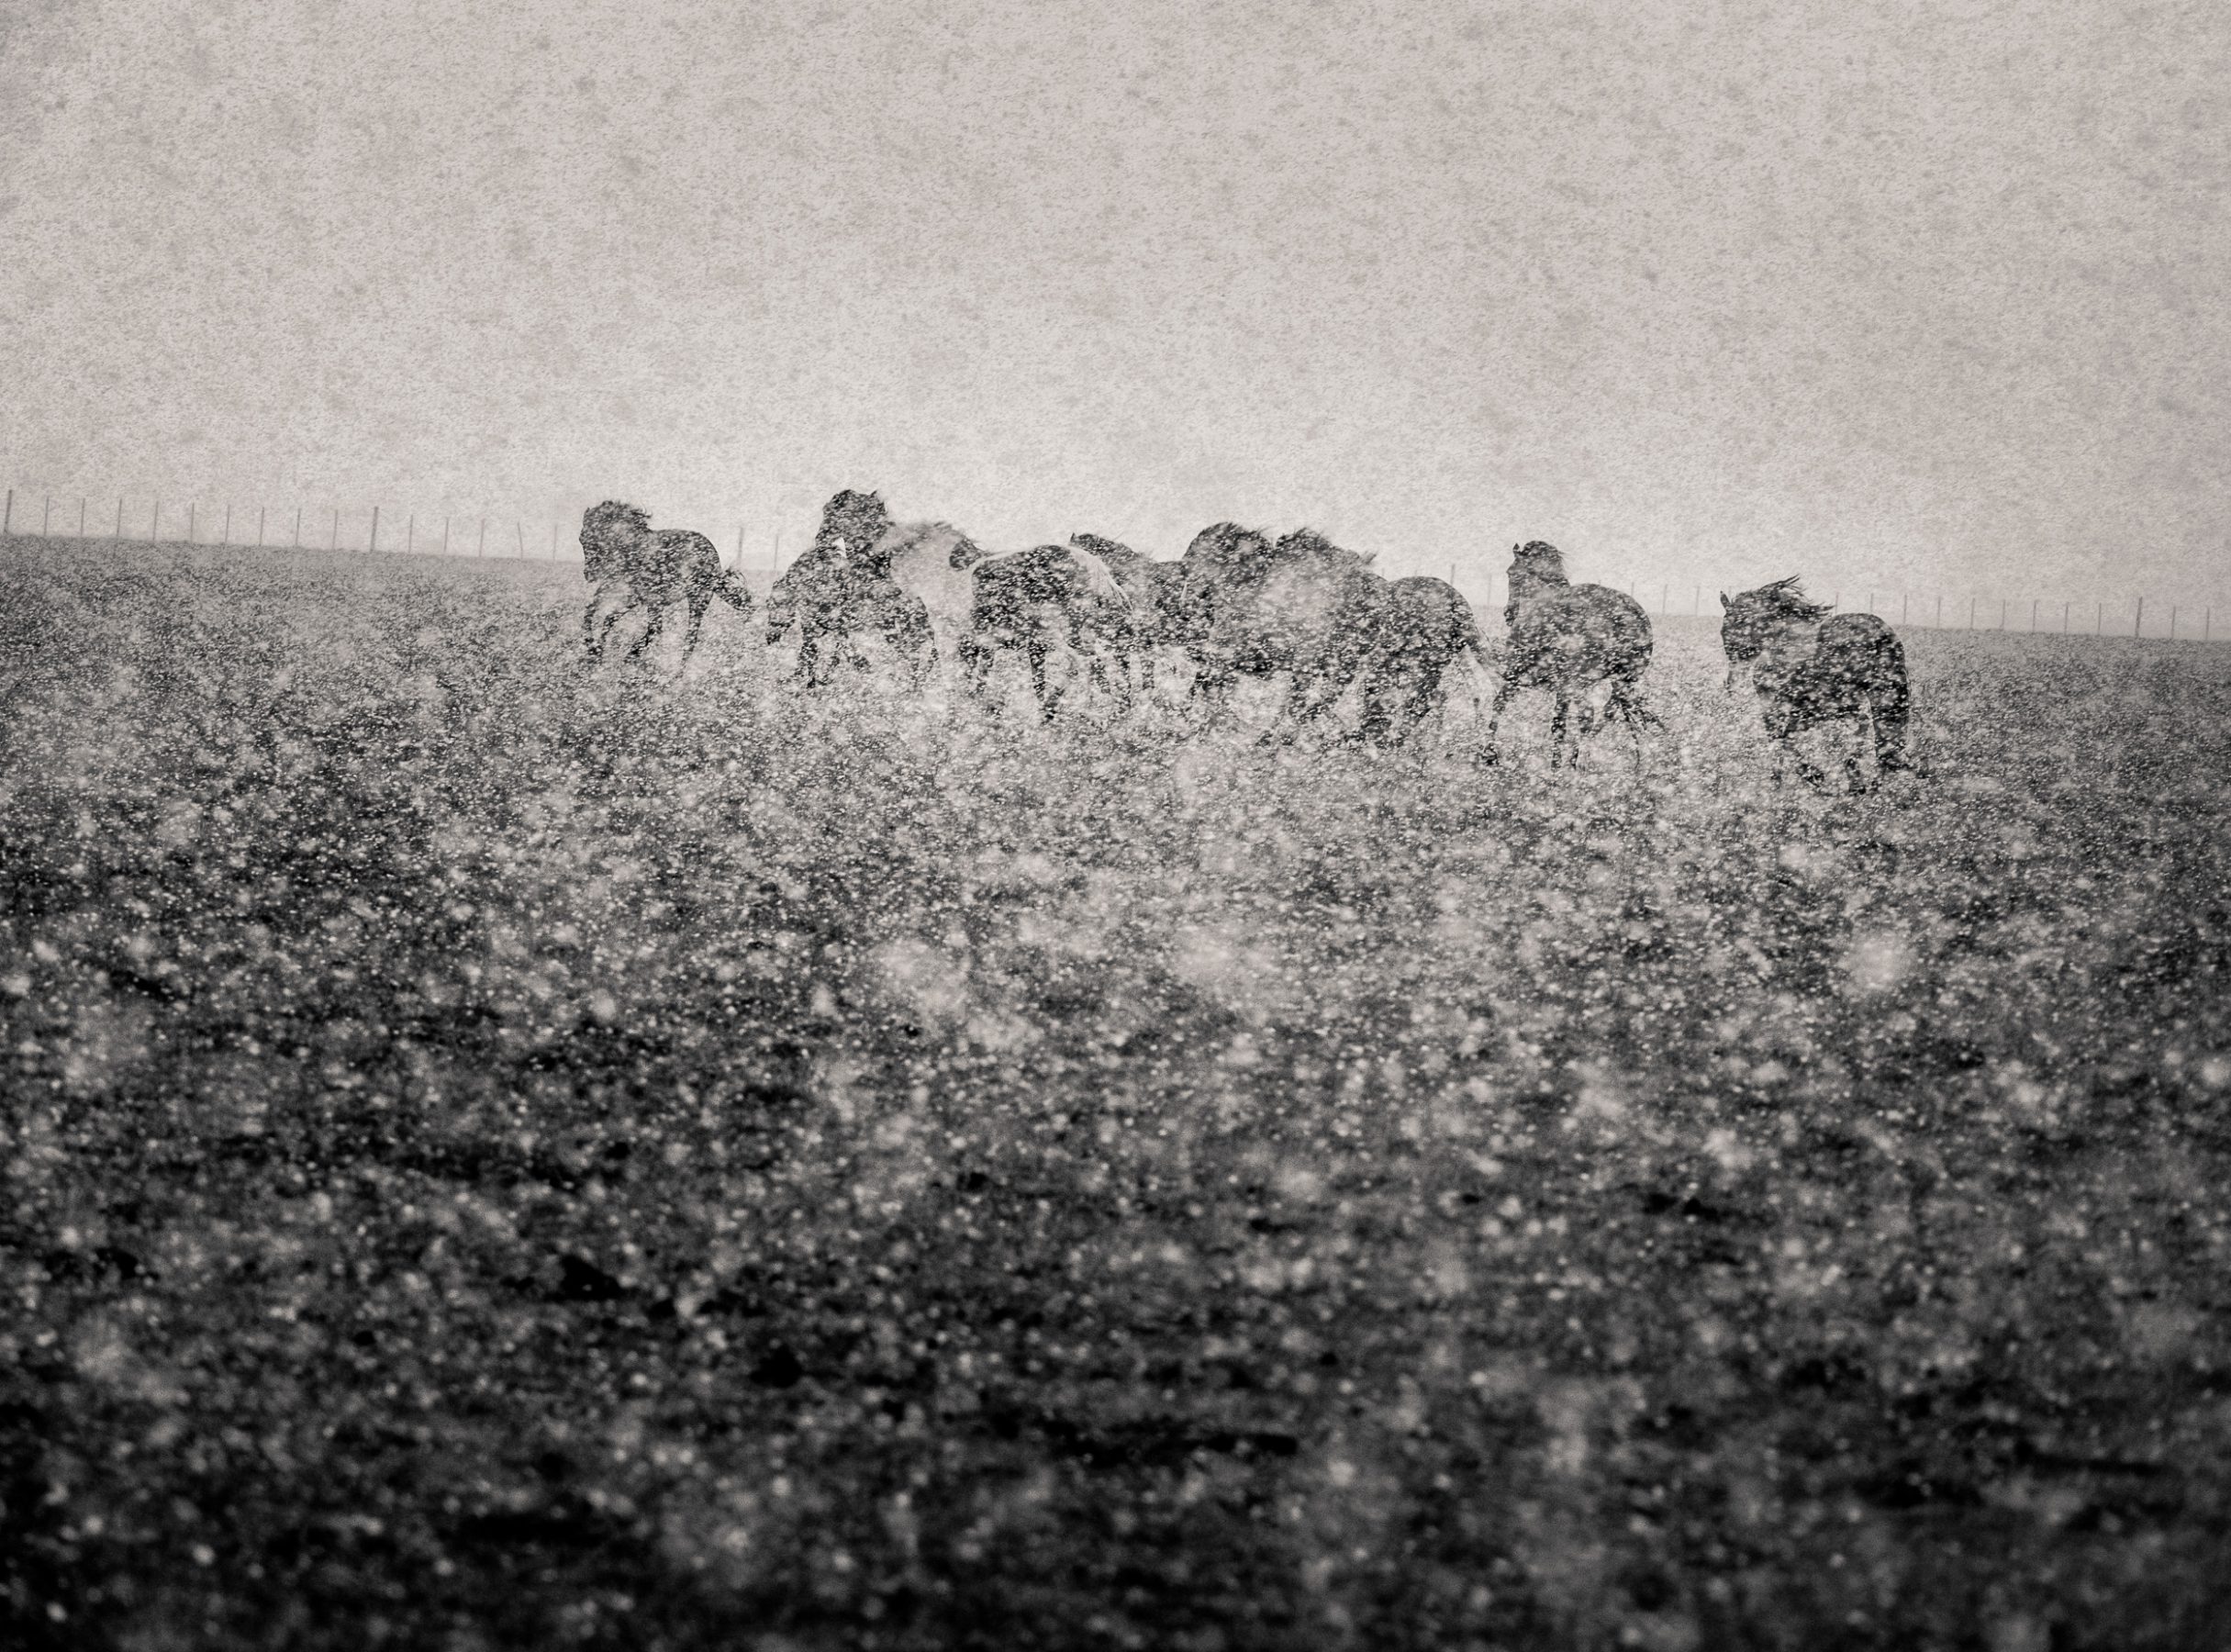 A group of wild horses running in a storm looking for shelter in Patagonia